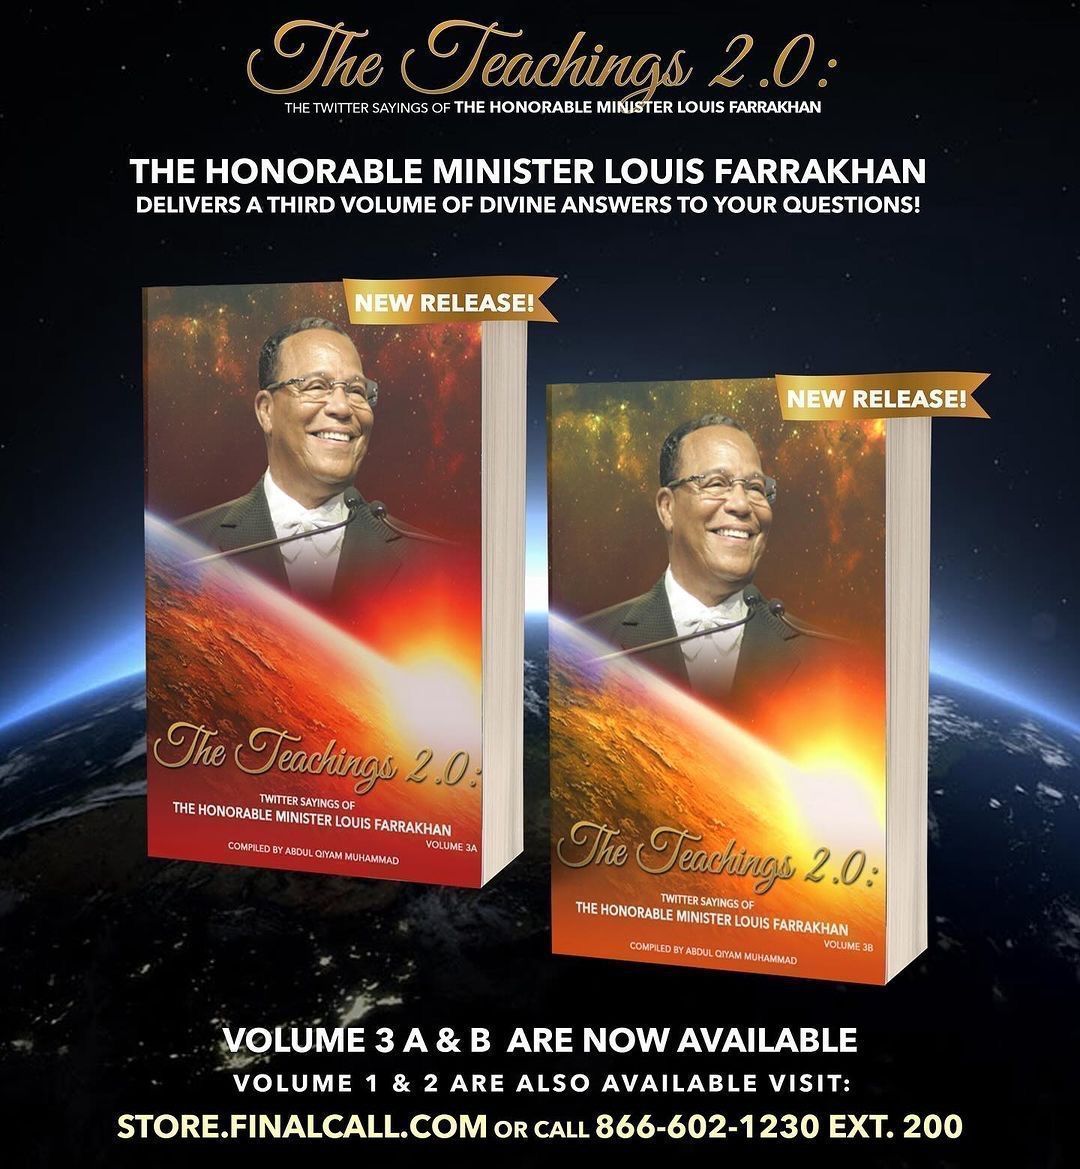 🎺Do you have your copies of Volumes 3A & 3B of the book series “The Teachings 2.0: The Twitter Sayings of The Honorable Minister @LouisFarrakhan”? Order yours today: buff.ly/3Fet6Wz #Farrakhan #AskFarrakhan